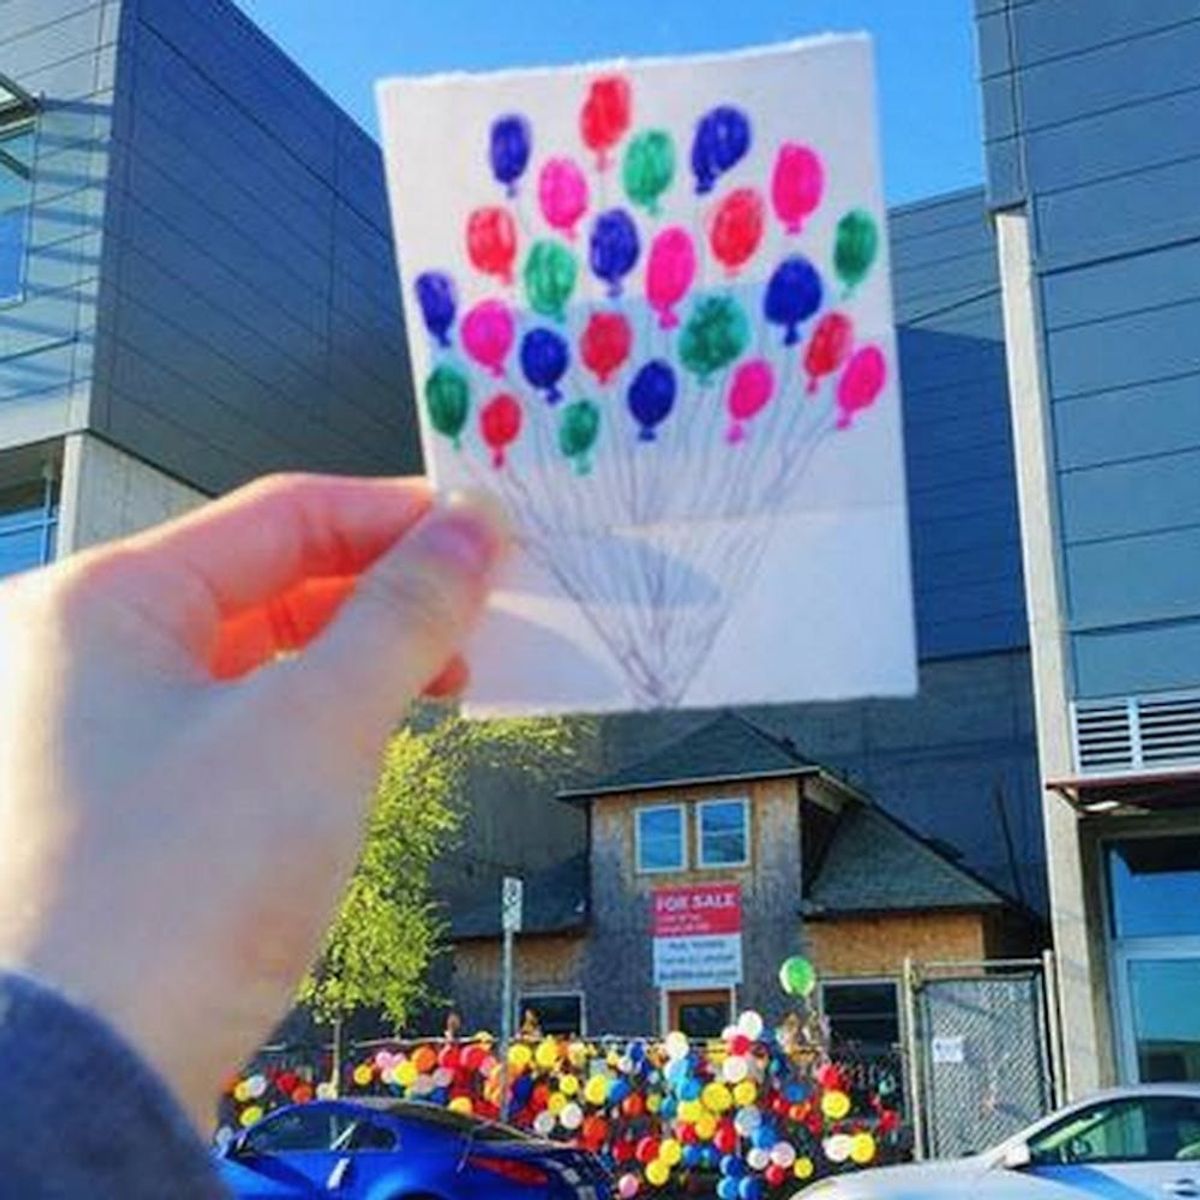 The Real-Life Up House Is Taking Flight